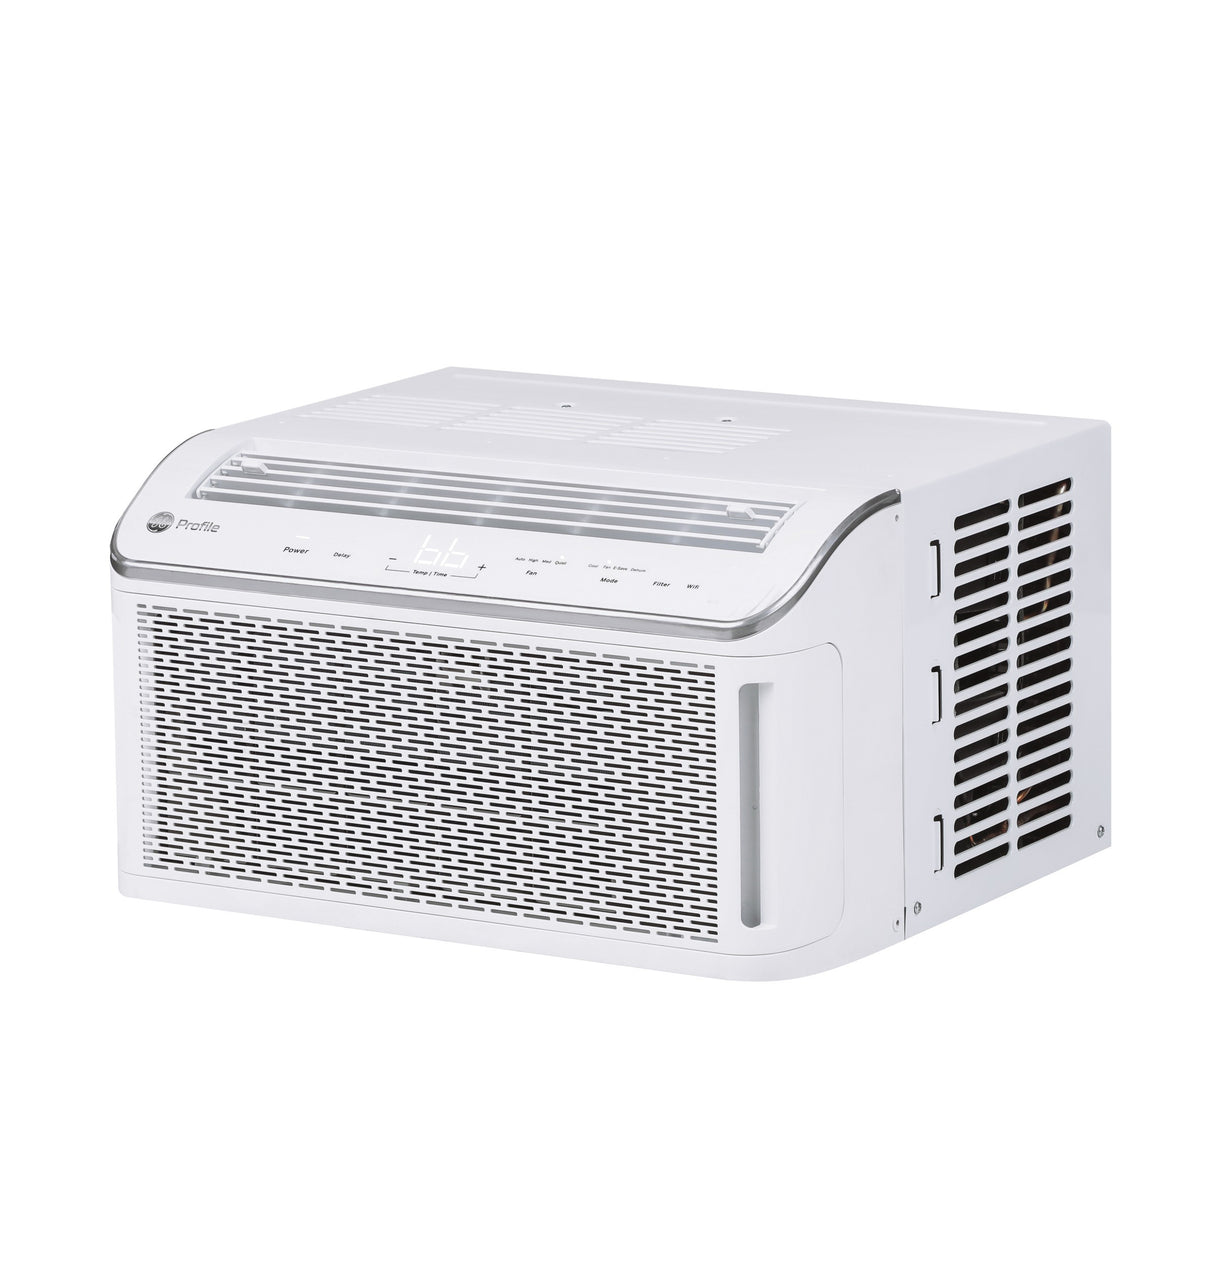 GE Profile(TM) 6,200 BTU Smart Ultra Quiet Window Air Conditioner for Small Rooms up to 250 sq. ft. - (PHC06LY)